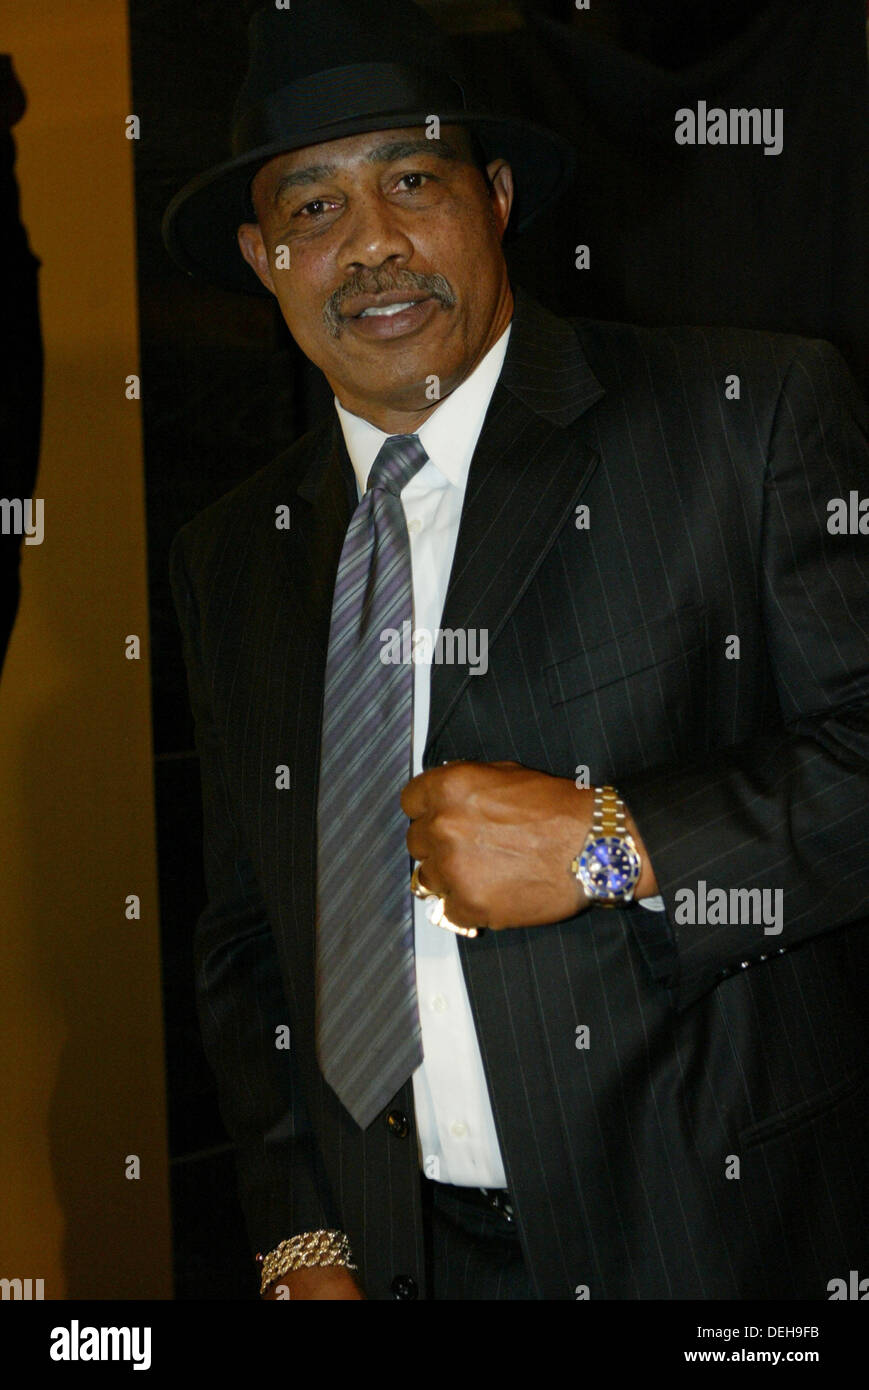 FILE PICTURES:  Kenneth Howard Norton Sr. (August 9, 1943 - September 18, 2013) was an American former heavyweight boxer and former WBC world Heavyweight Champion. He was best known for his 12-round victory over M. Ali, when he famously broke Ali's jaw, on March 31, 1973, becoming only the second man to defeat a peak Ali as a professional. PICTURED: Dec 19, 2006; Las Vegas, Nevada, U.S. - Former World Champion Boxer Ken Norton at the 'Rocky Balboa' red carpet celebration at the Aladdin HotelCredit Image: Credit:  Mary Ann Owen/Zumapress/Alamy Live News Stock Photo